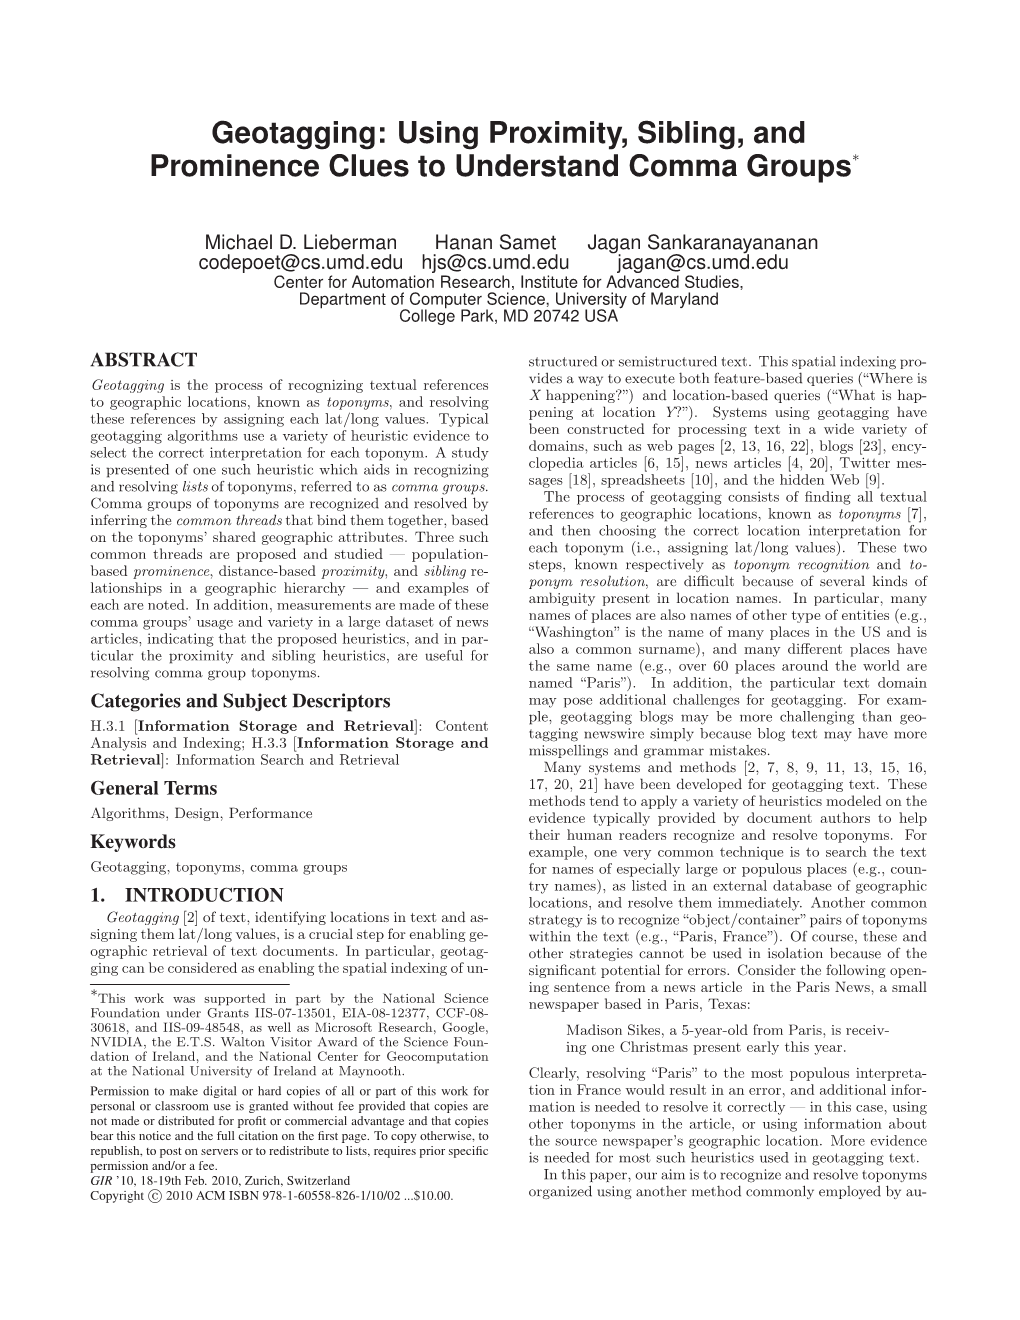 Geotagging: Using Proximity, Sibling, and Prominence Clues to Understand Comma Groups∗